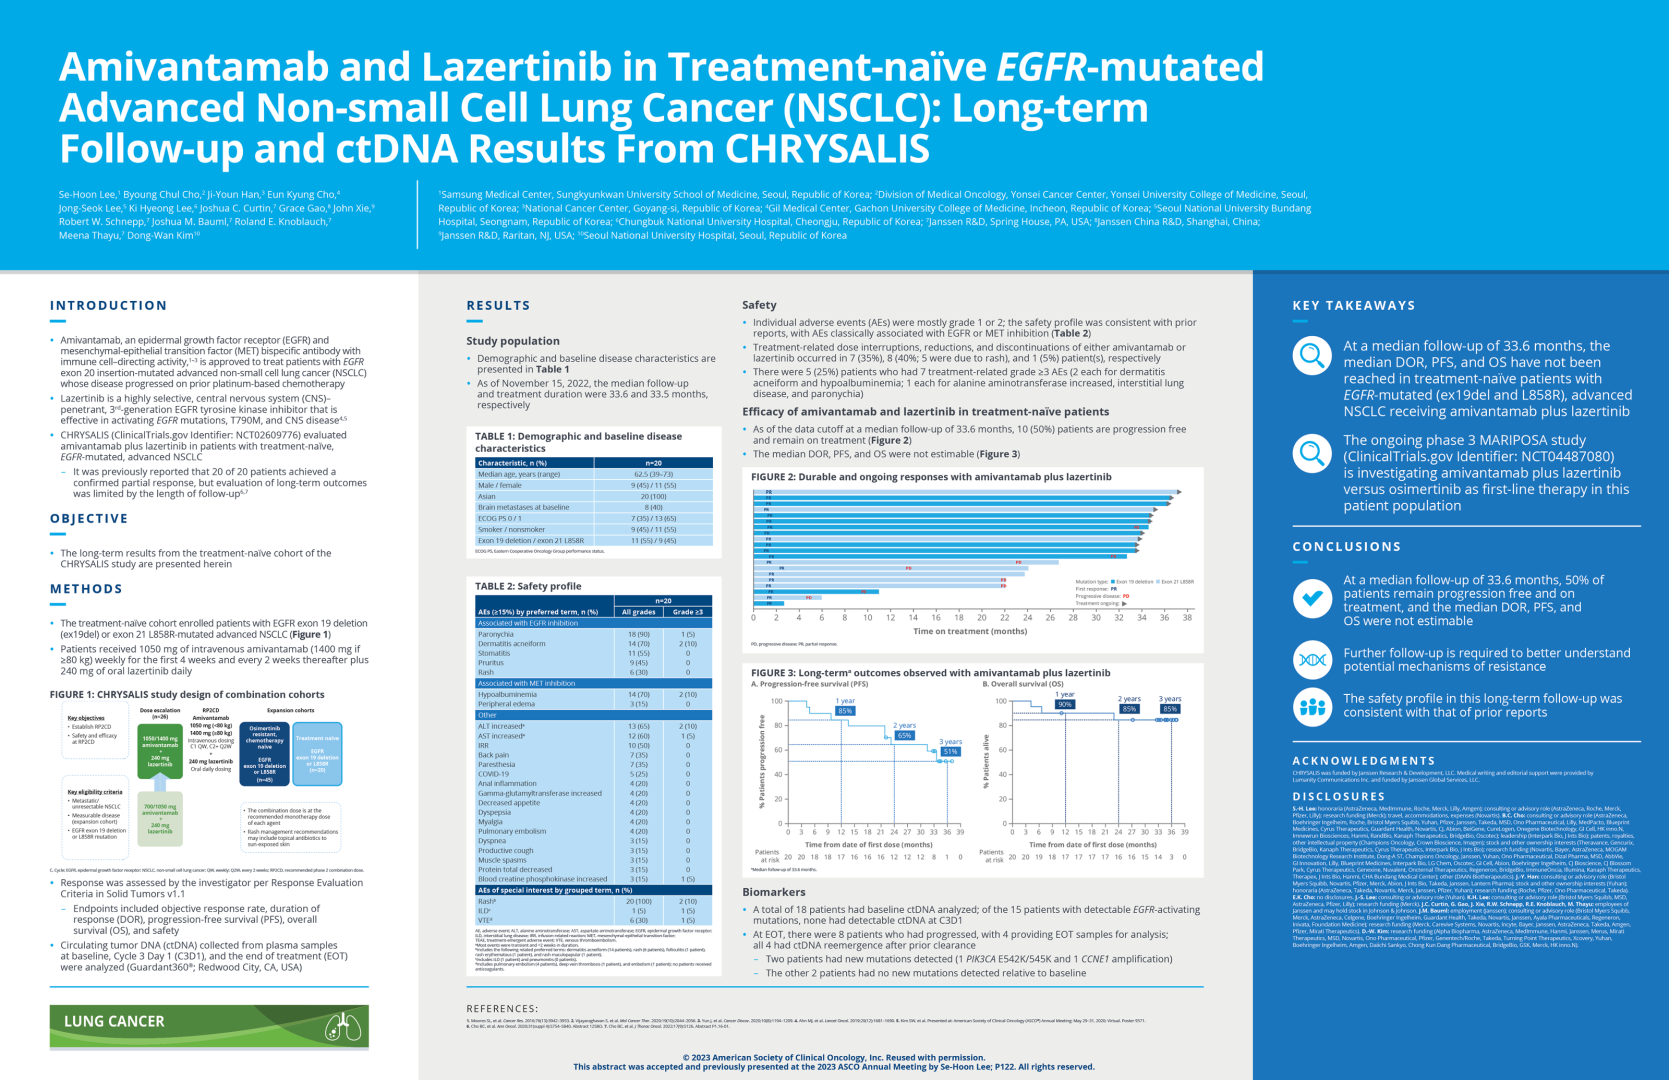 JL1102ES: Amivantamab and lazertinib in treatment-naïve EGFR-mutated advanced non-small cell lung cancer (NSCLC): Long-term follow-up and ctDNA results from CHRYSALIS icon